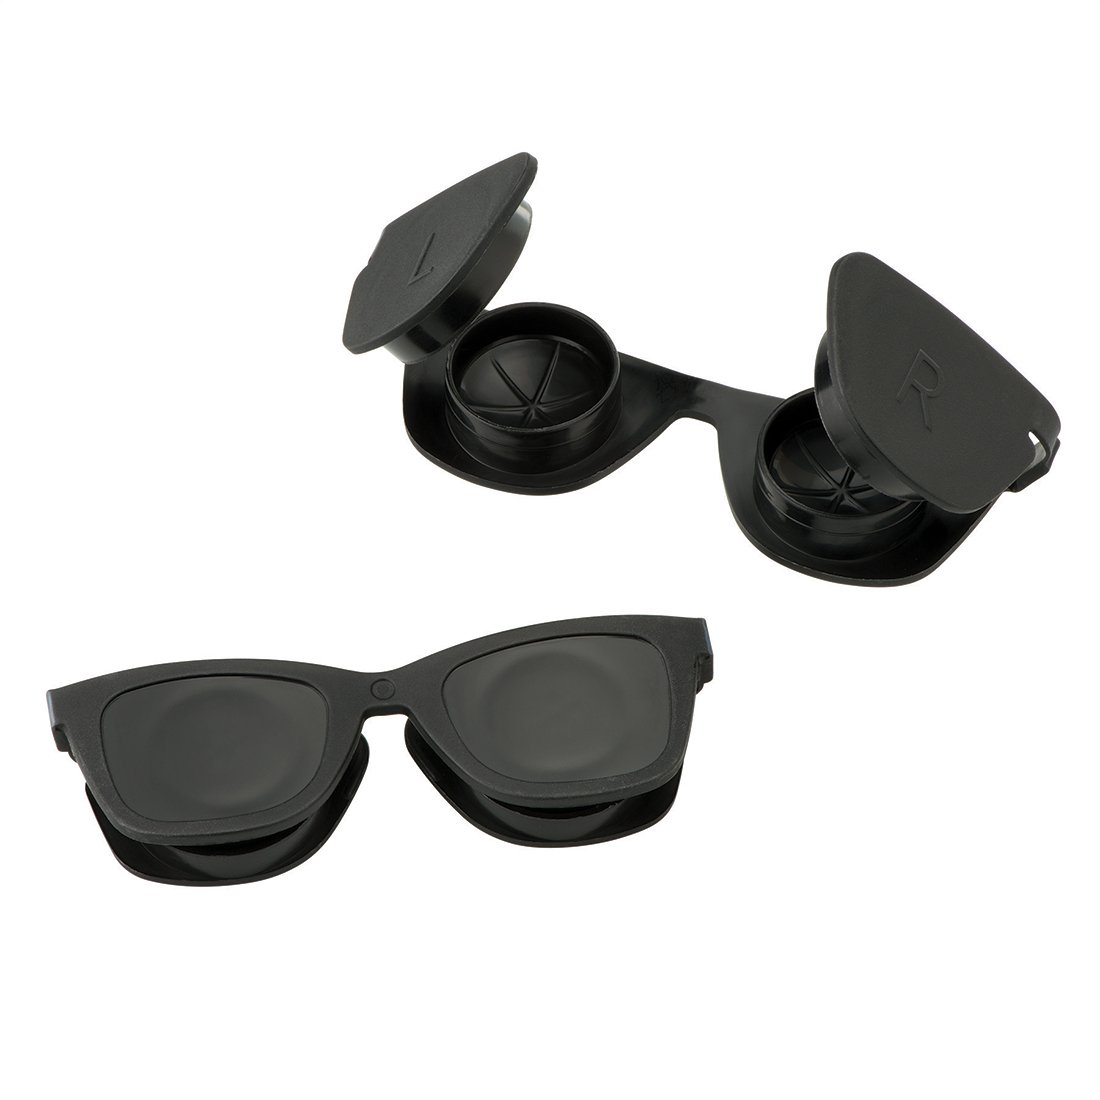 Black Sunglass Contact Lens Cases - Eye Care Accessories - 100 per Pack